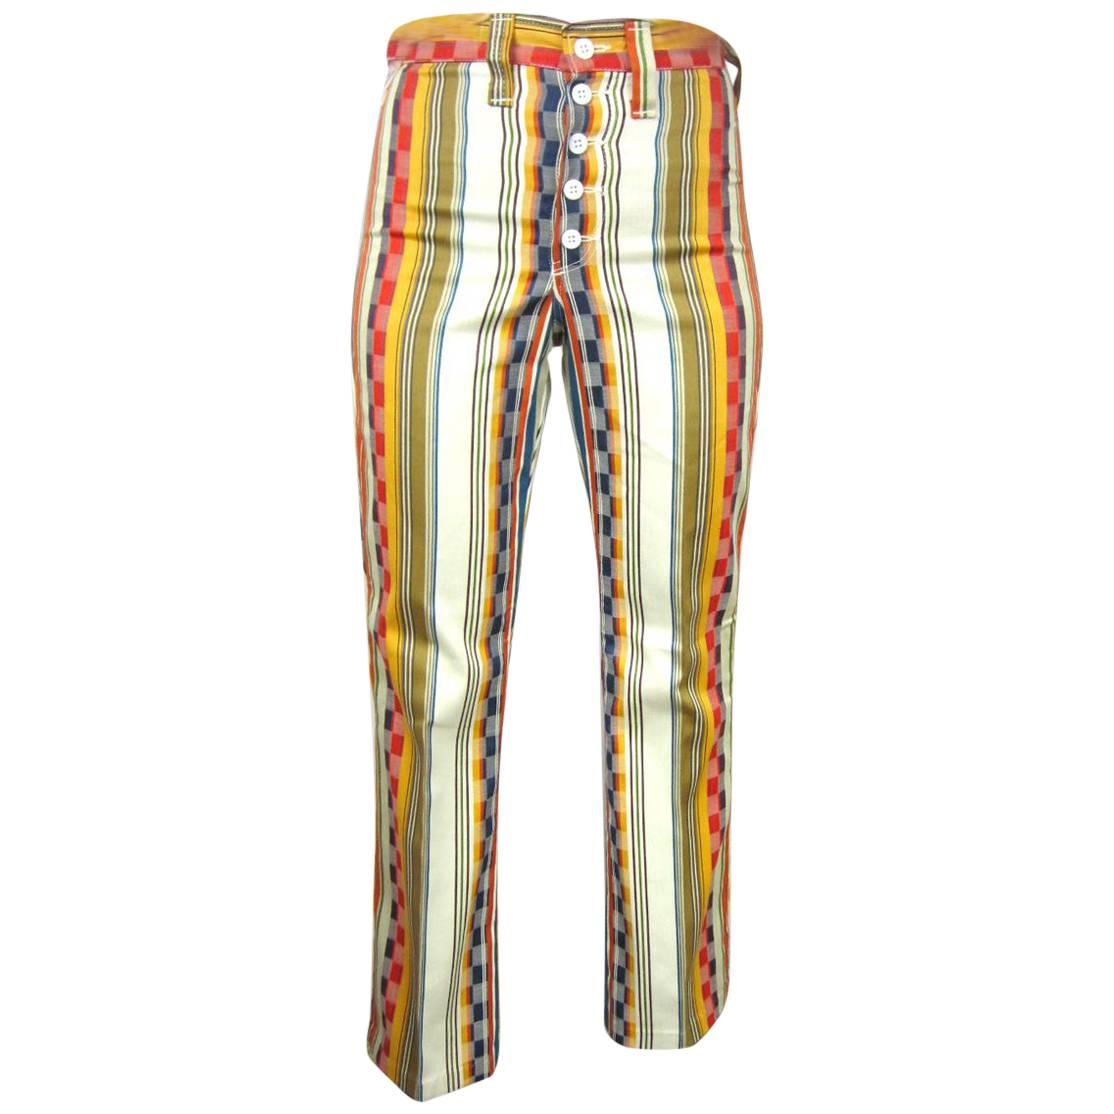  Wrangler Funky Hippie Striped Pants 1960s, New Never Worn  For Sale